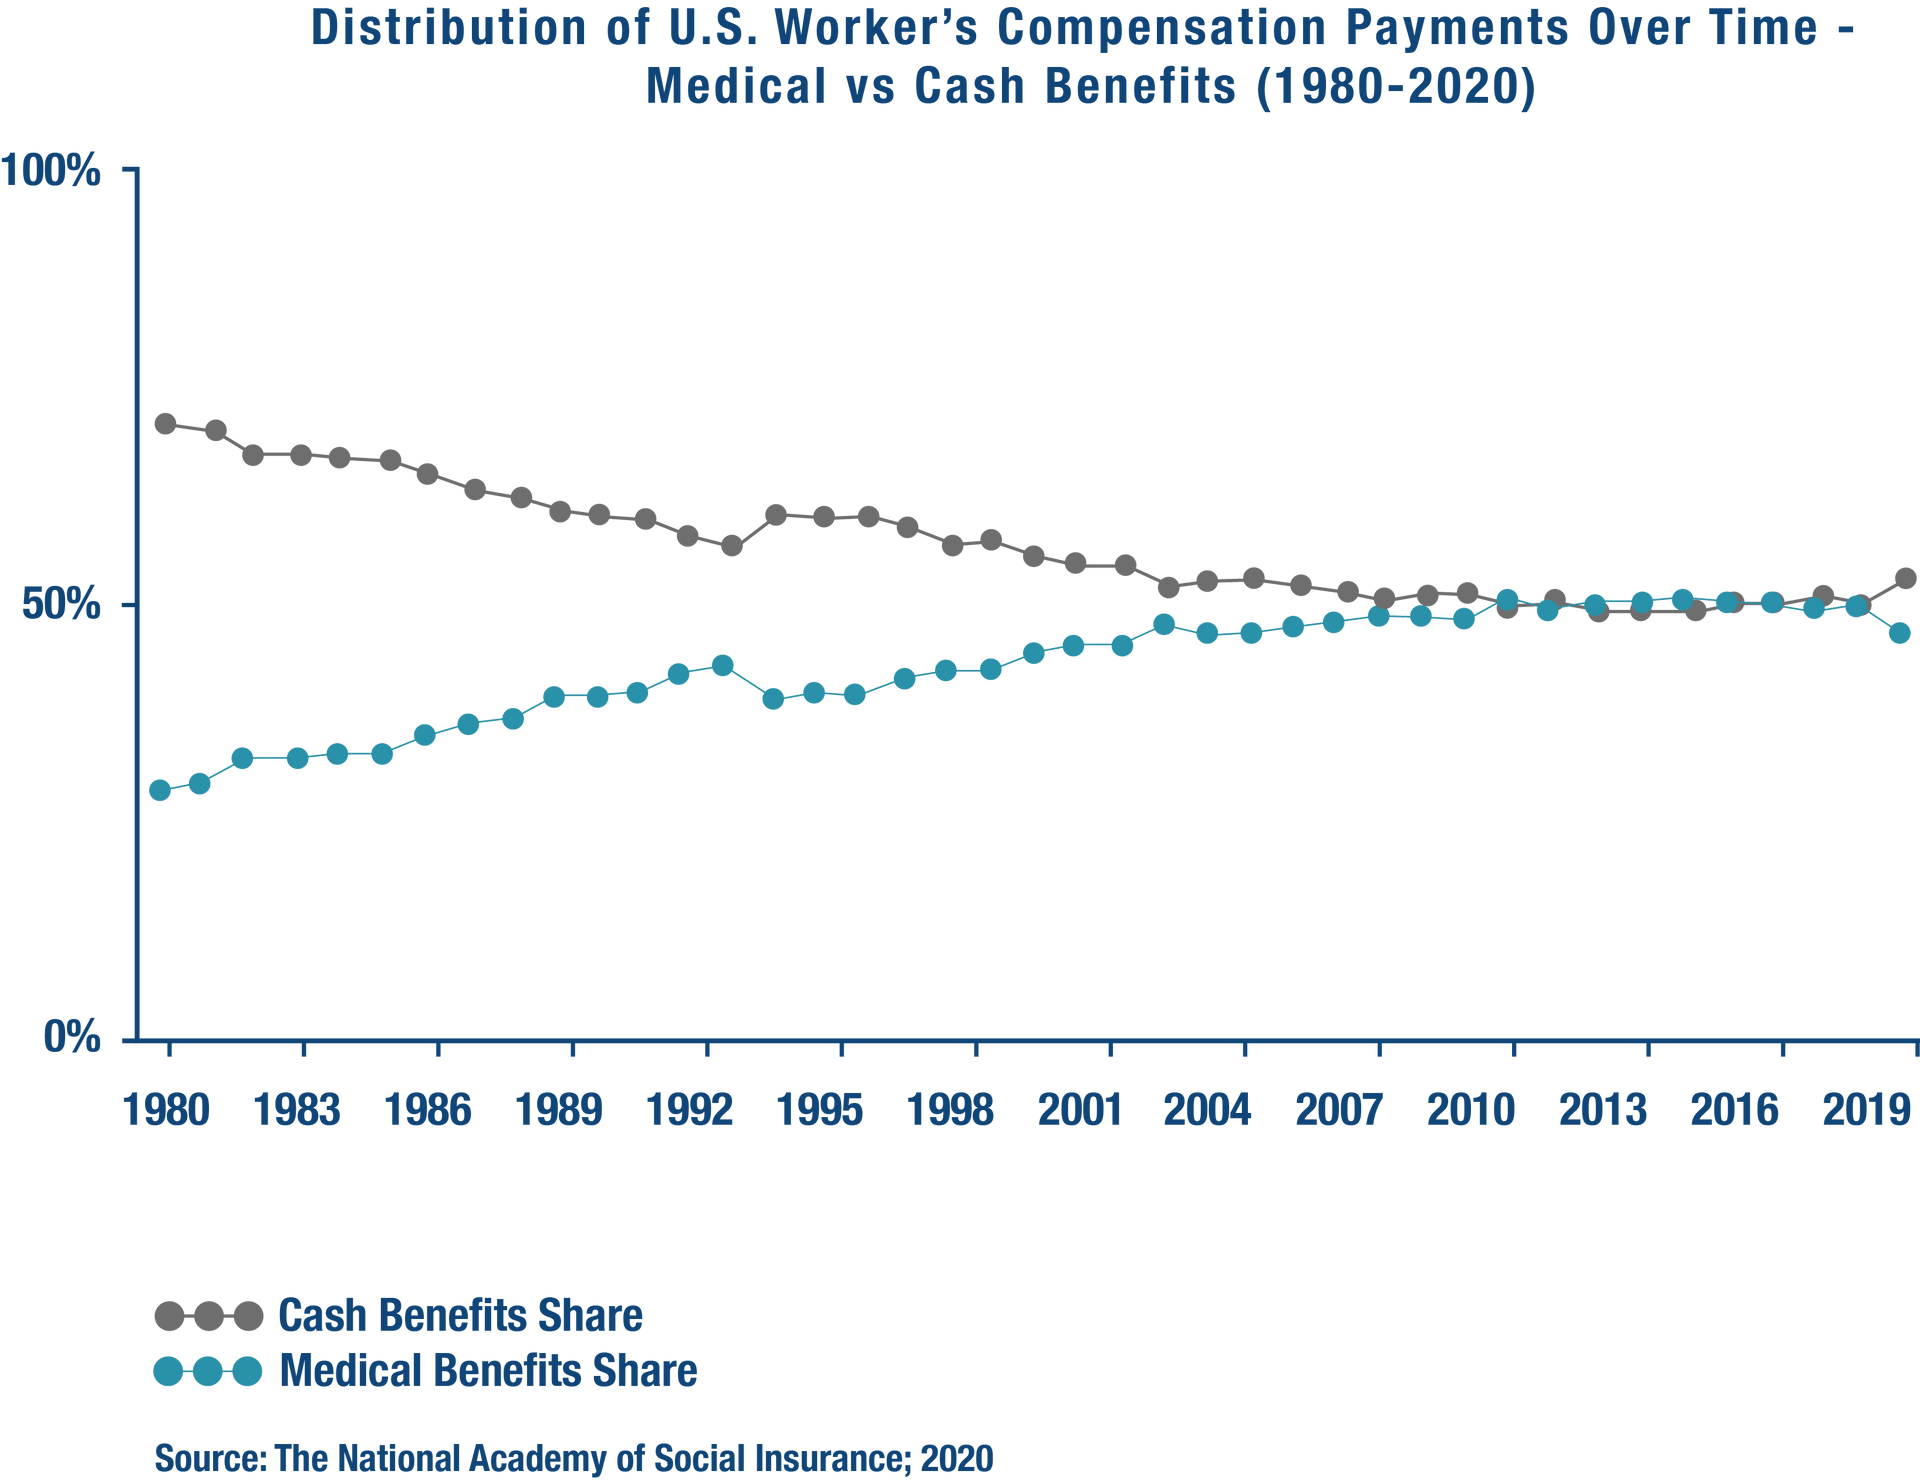 Graph that depicts the distribution of U.S. workers compensation payments over time (medical vs. cash benefits) from 1980-2020.